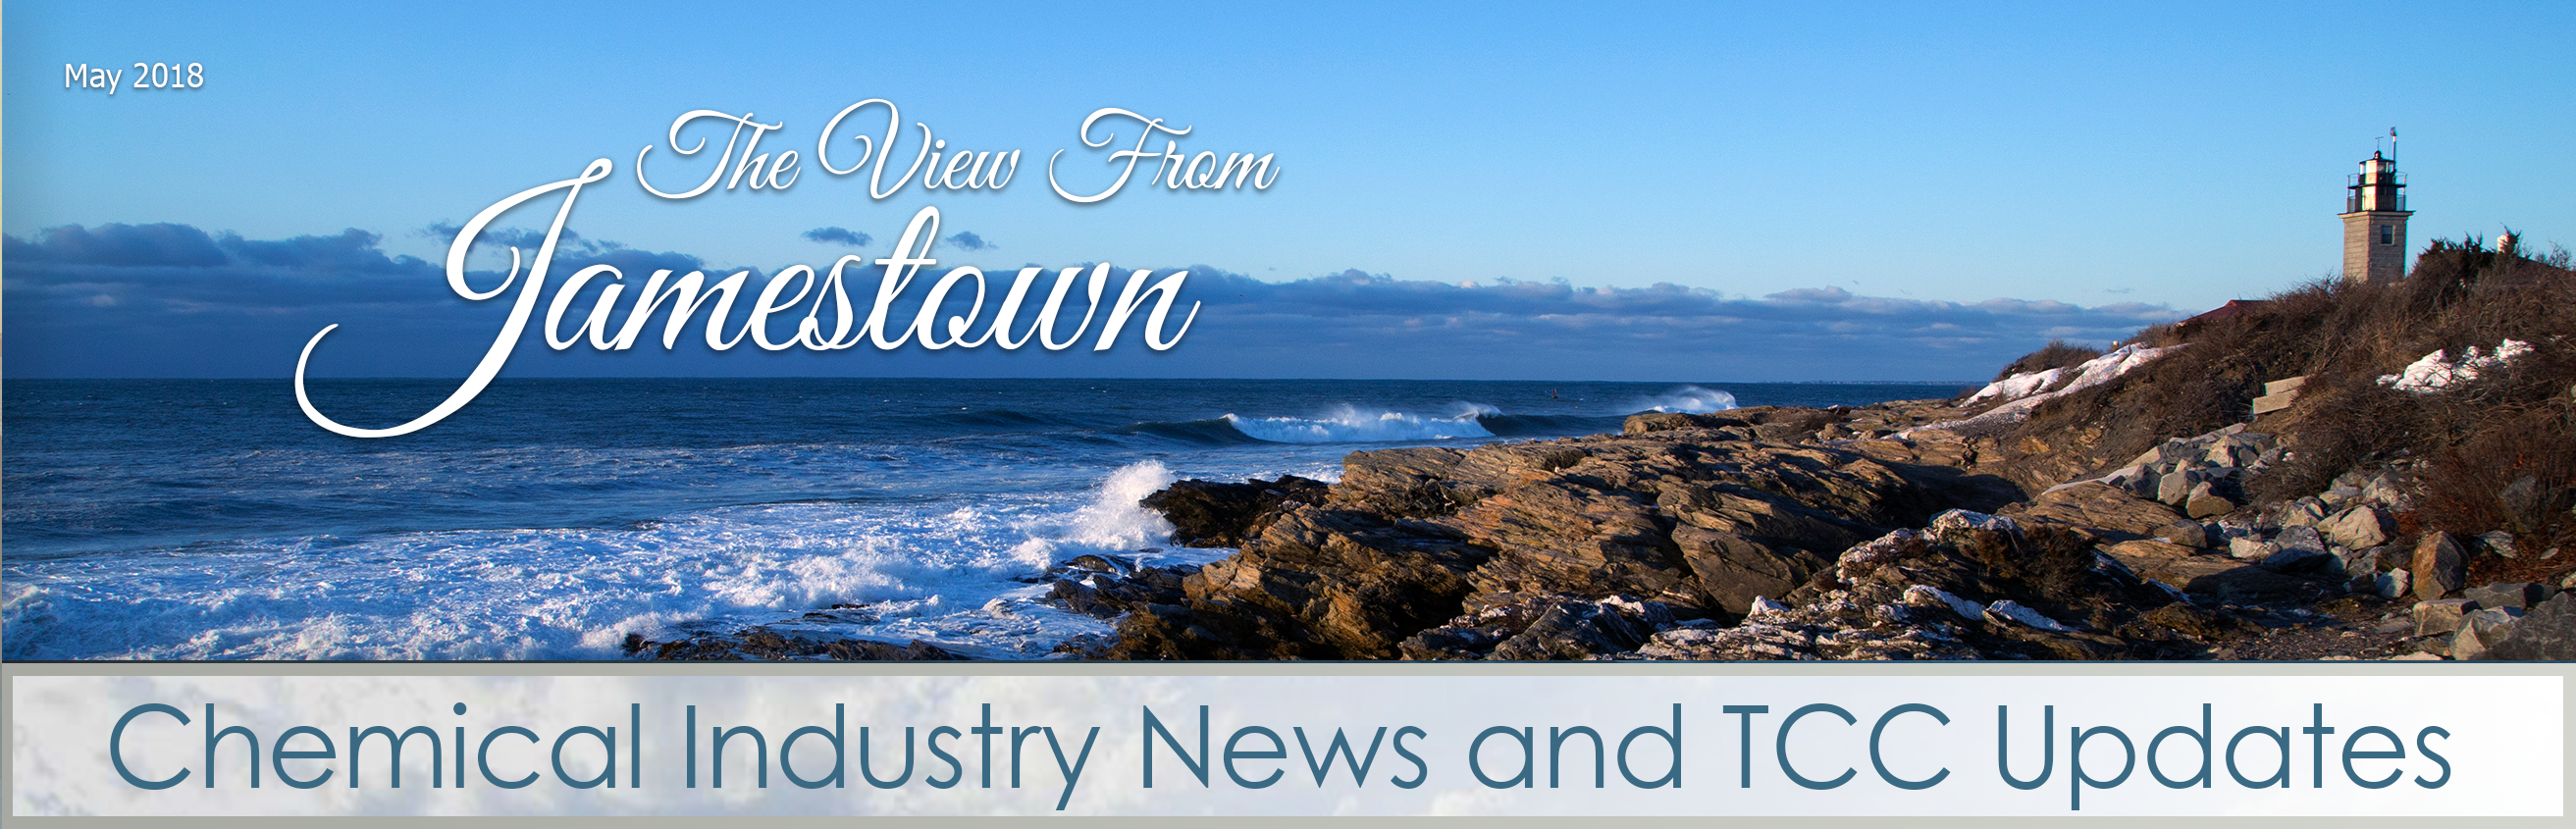 The View from jamestown may 2018 - The Chemical Company | Chemical Distributor